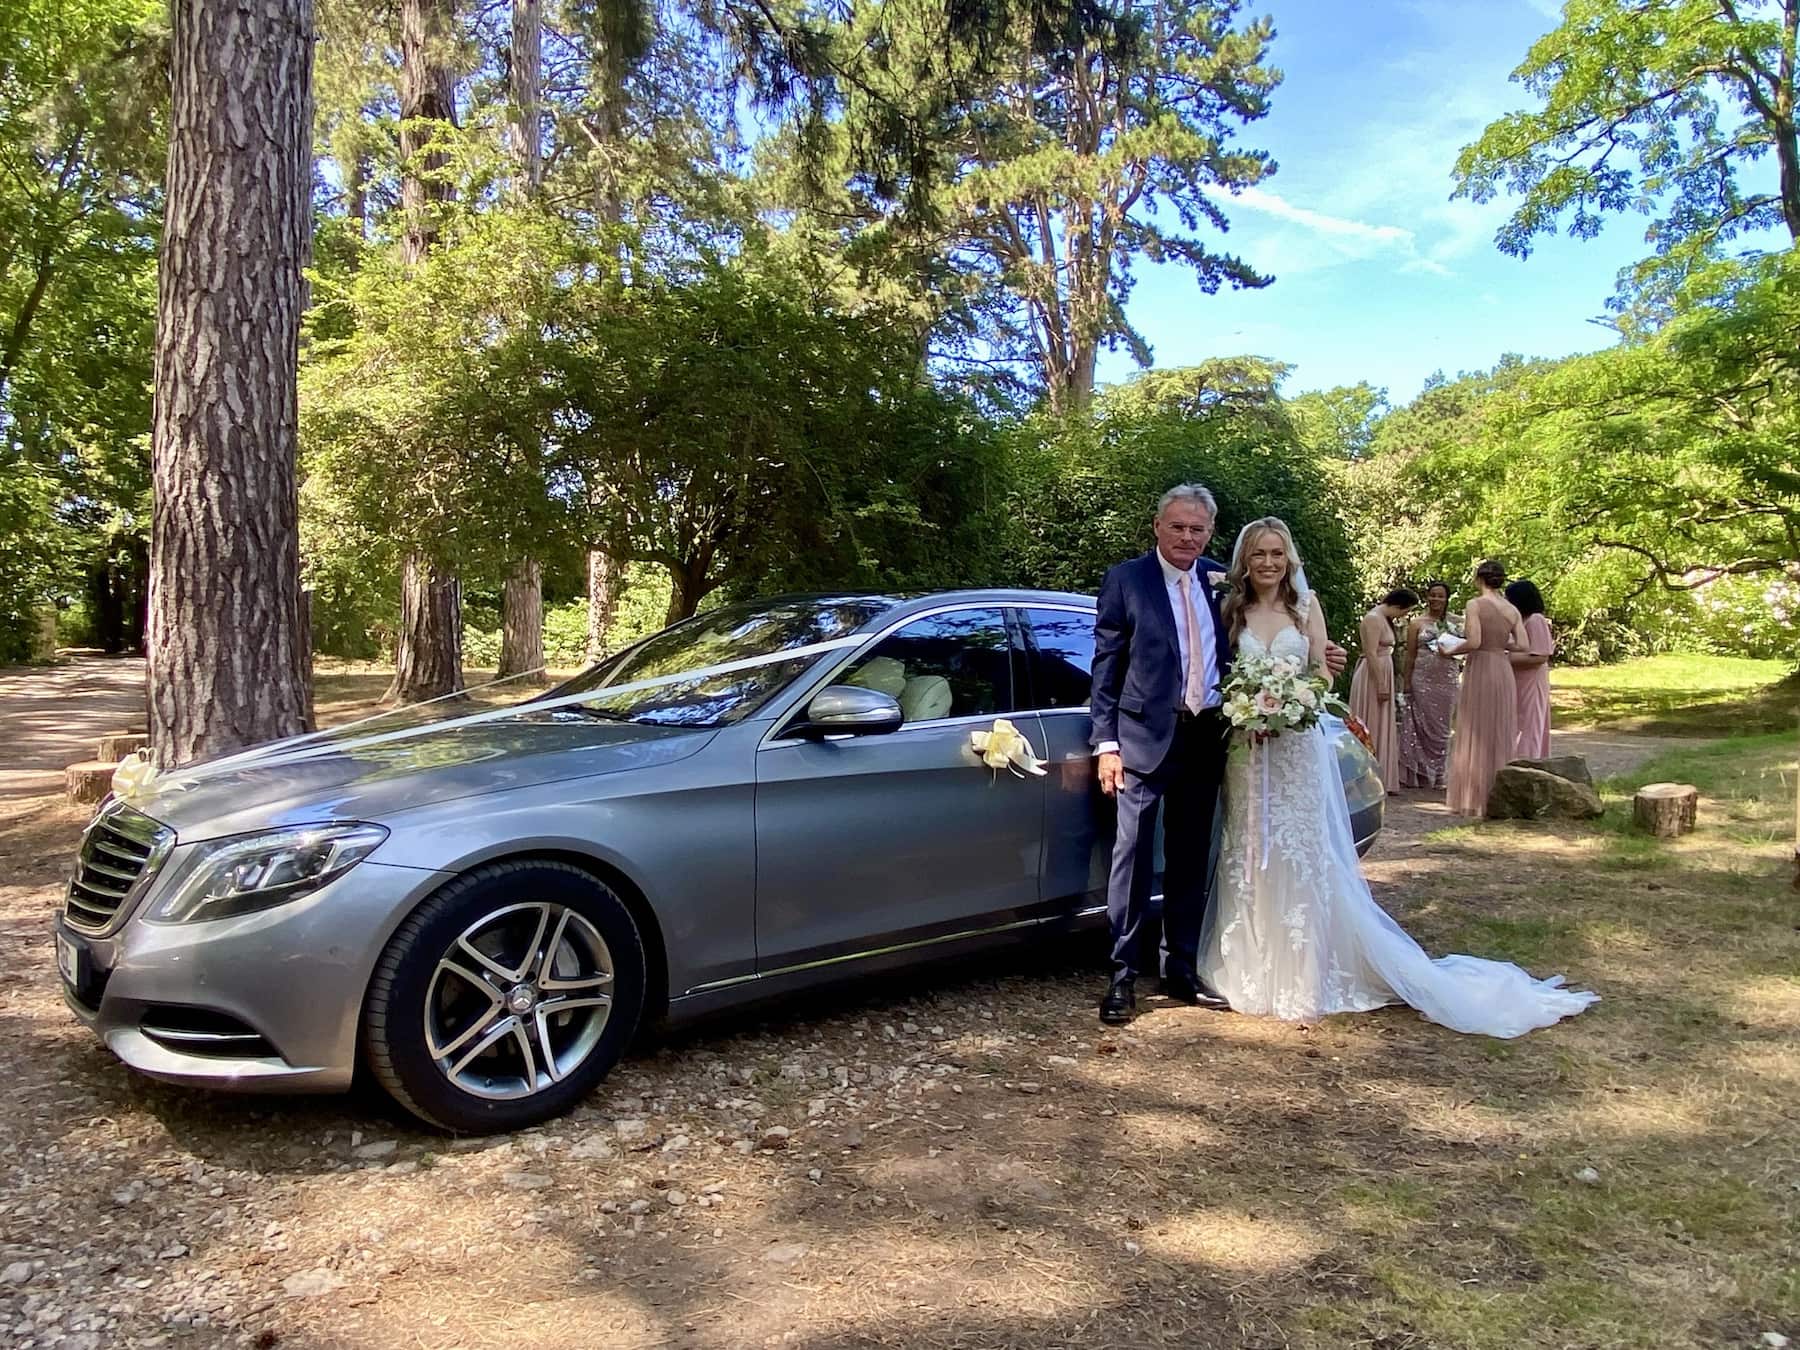 Our Mercedes S Class with the Bride and her Father on a recent Wedding Car Hire in Derby